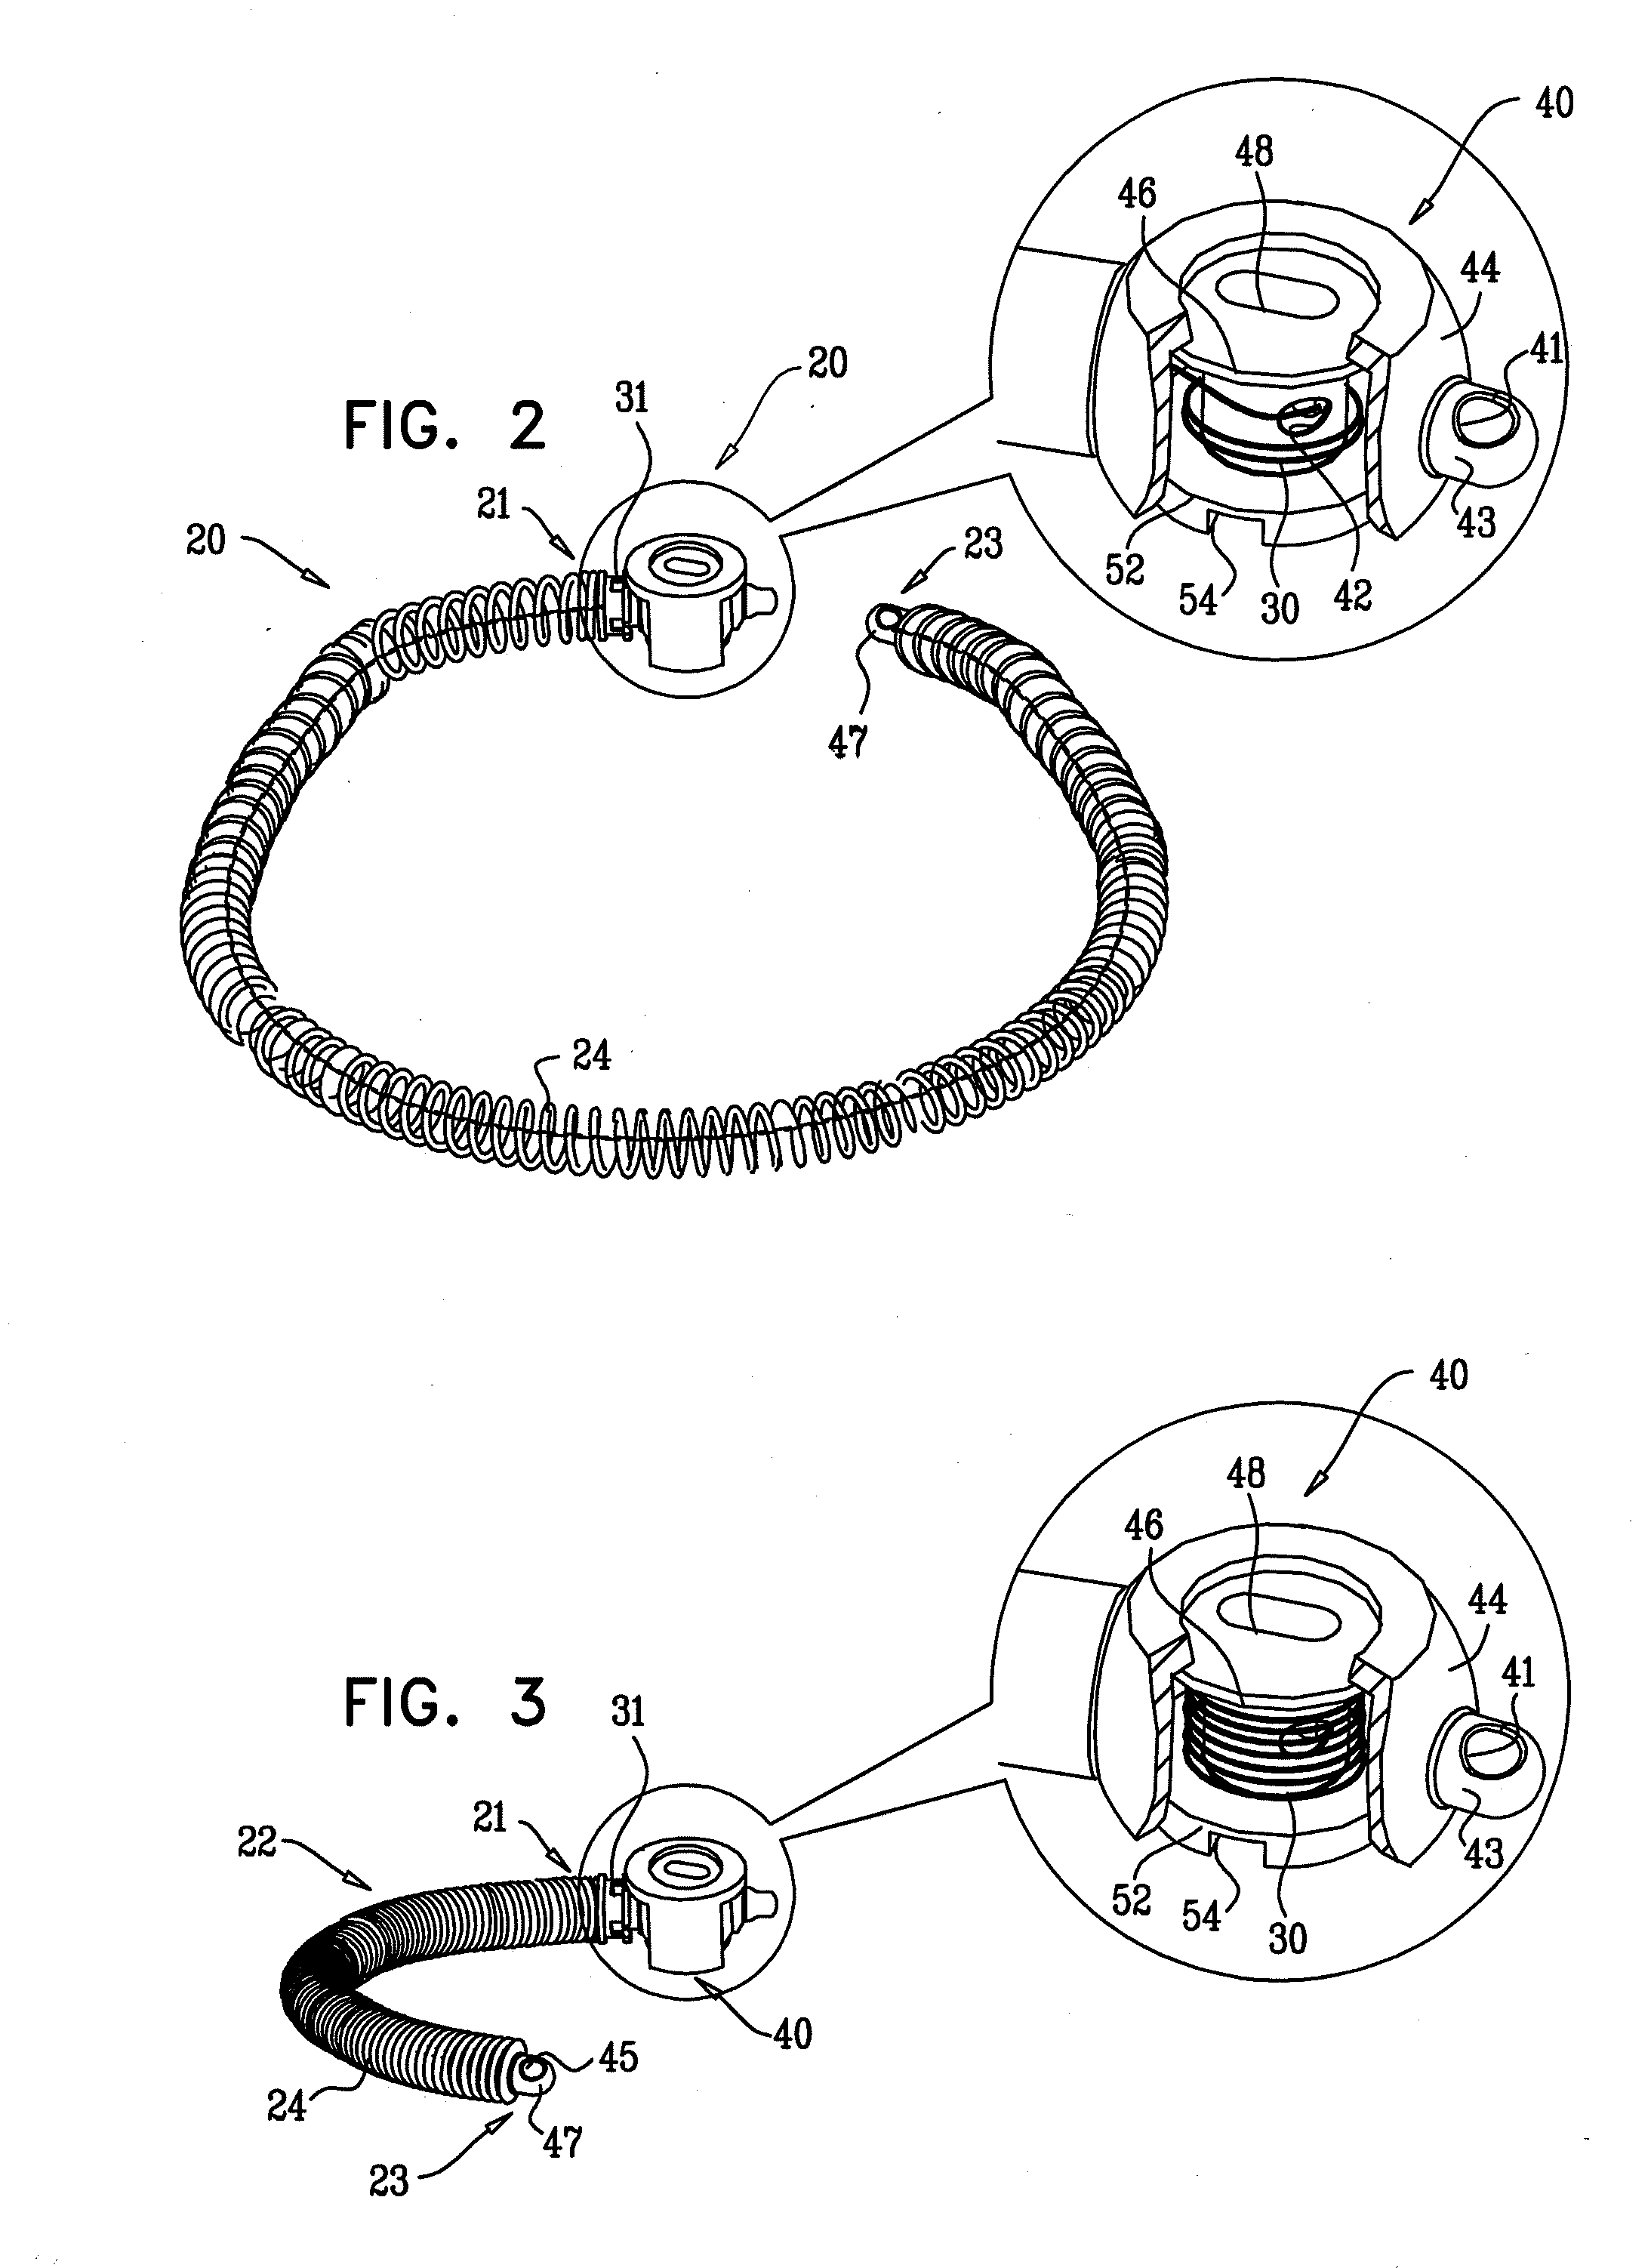 Adjustable partial annuloplasty ring and mechanism therefor